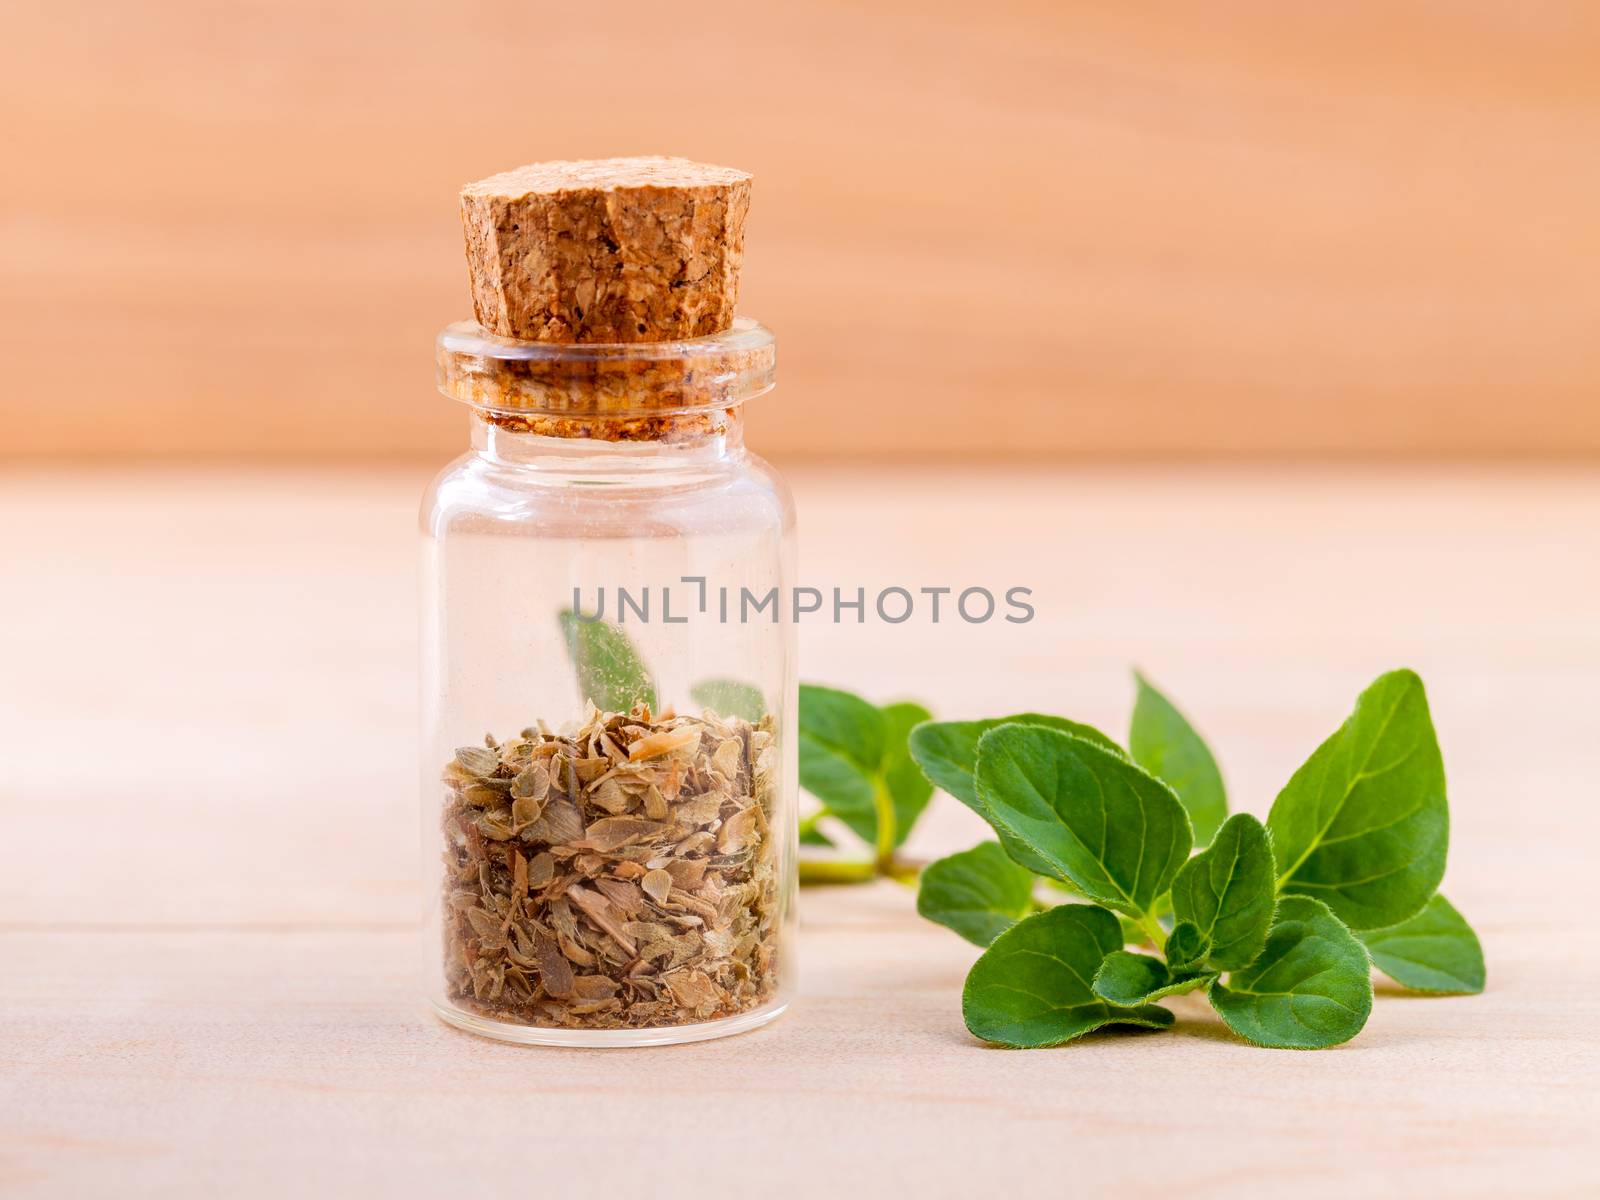 Fresh Oregano and dry Oregano in a the bottle on wooden background . by kerdkanno